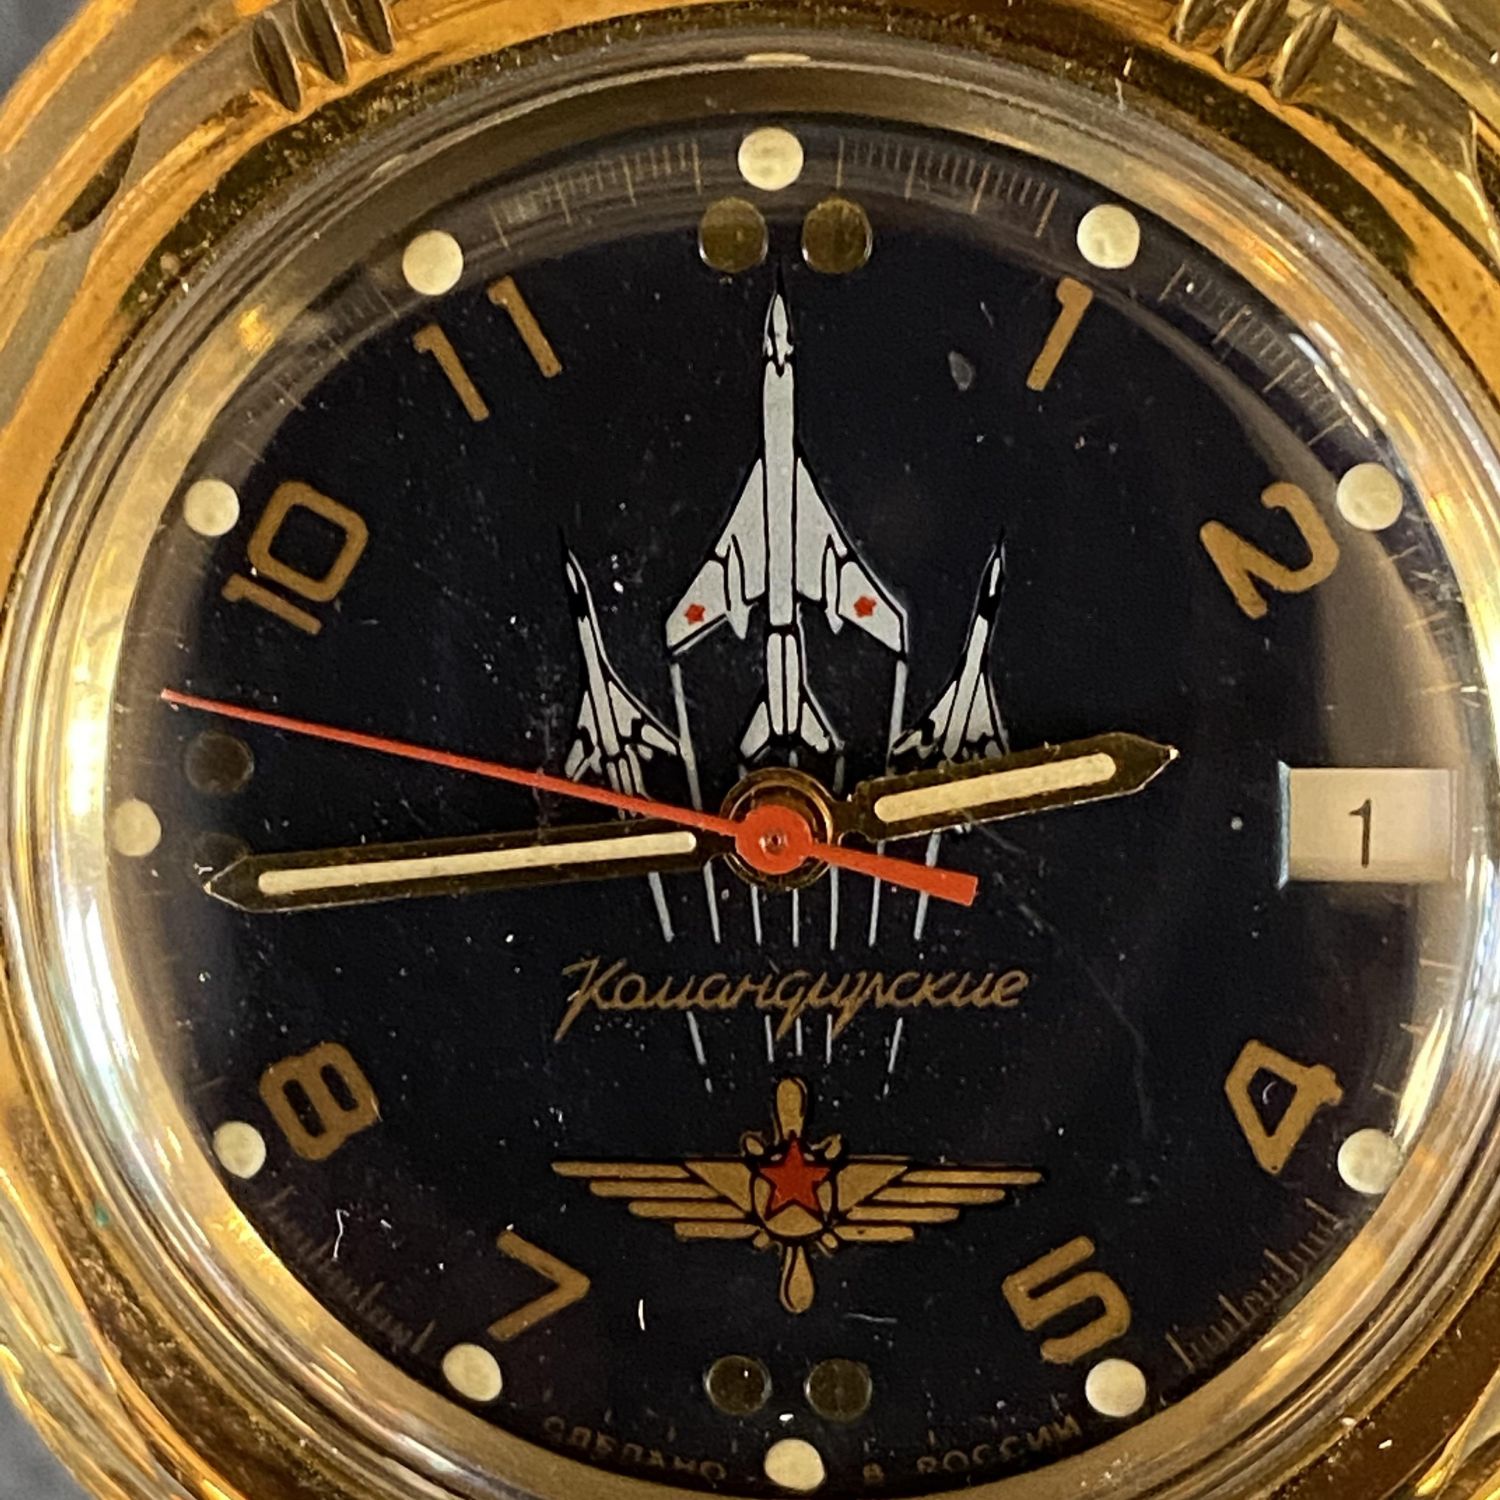 Russian Pilots Watch - Militaria - Hemswell Antique Centres